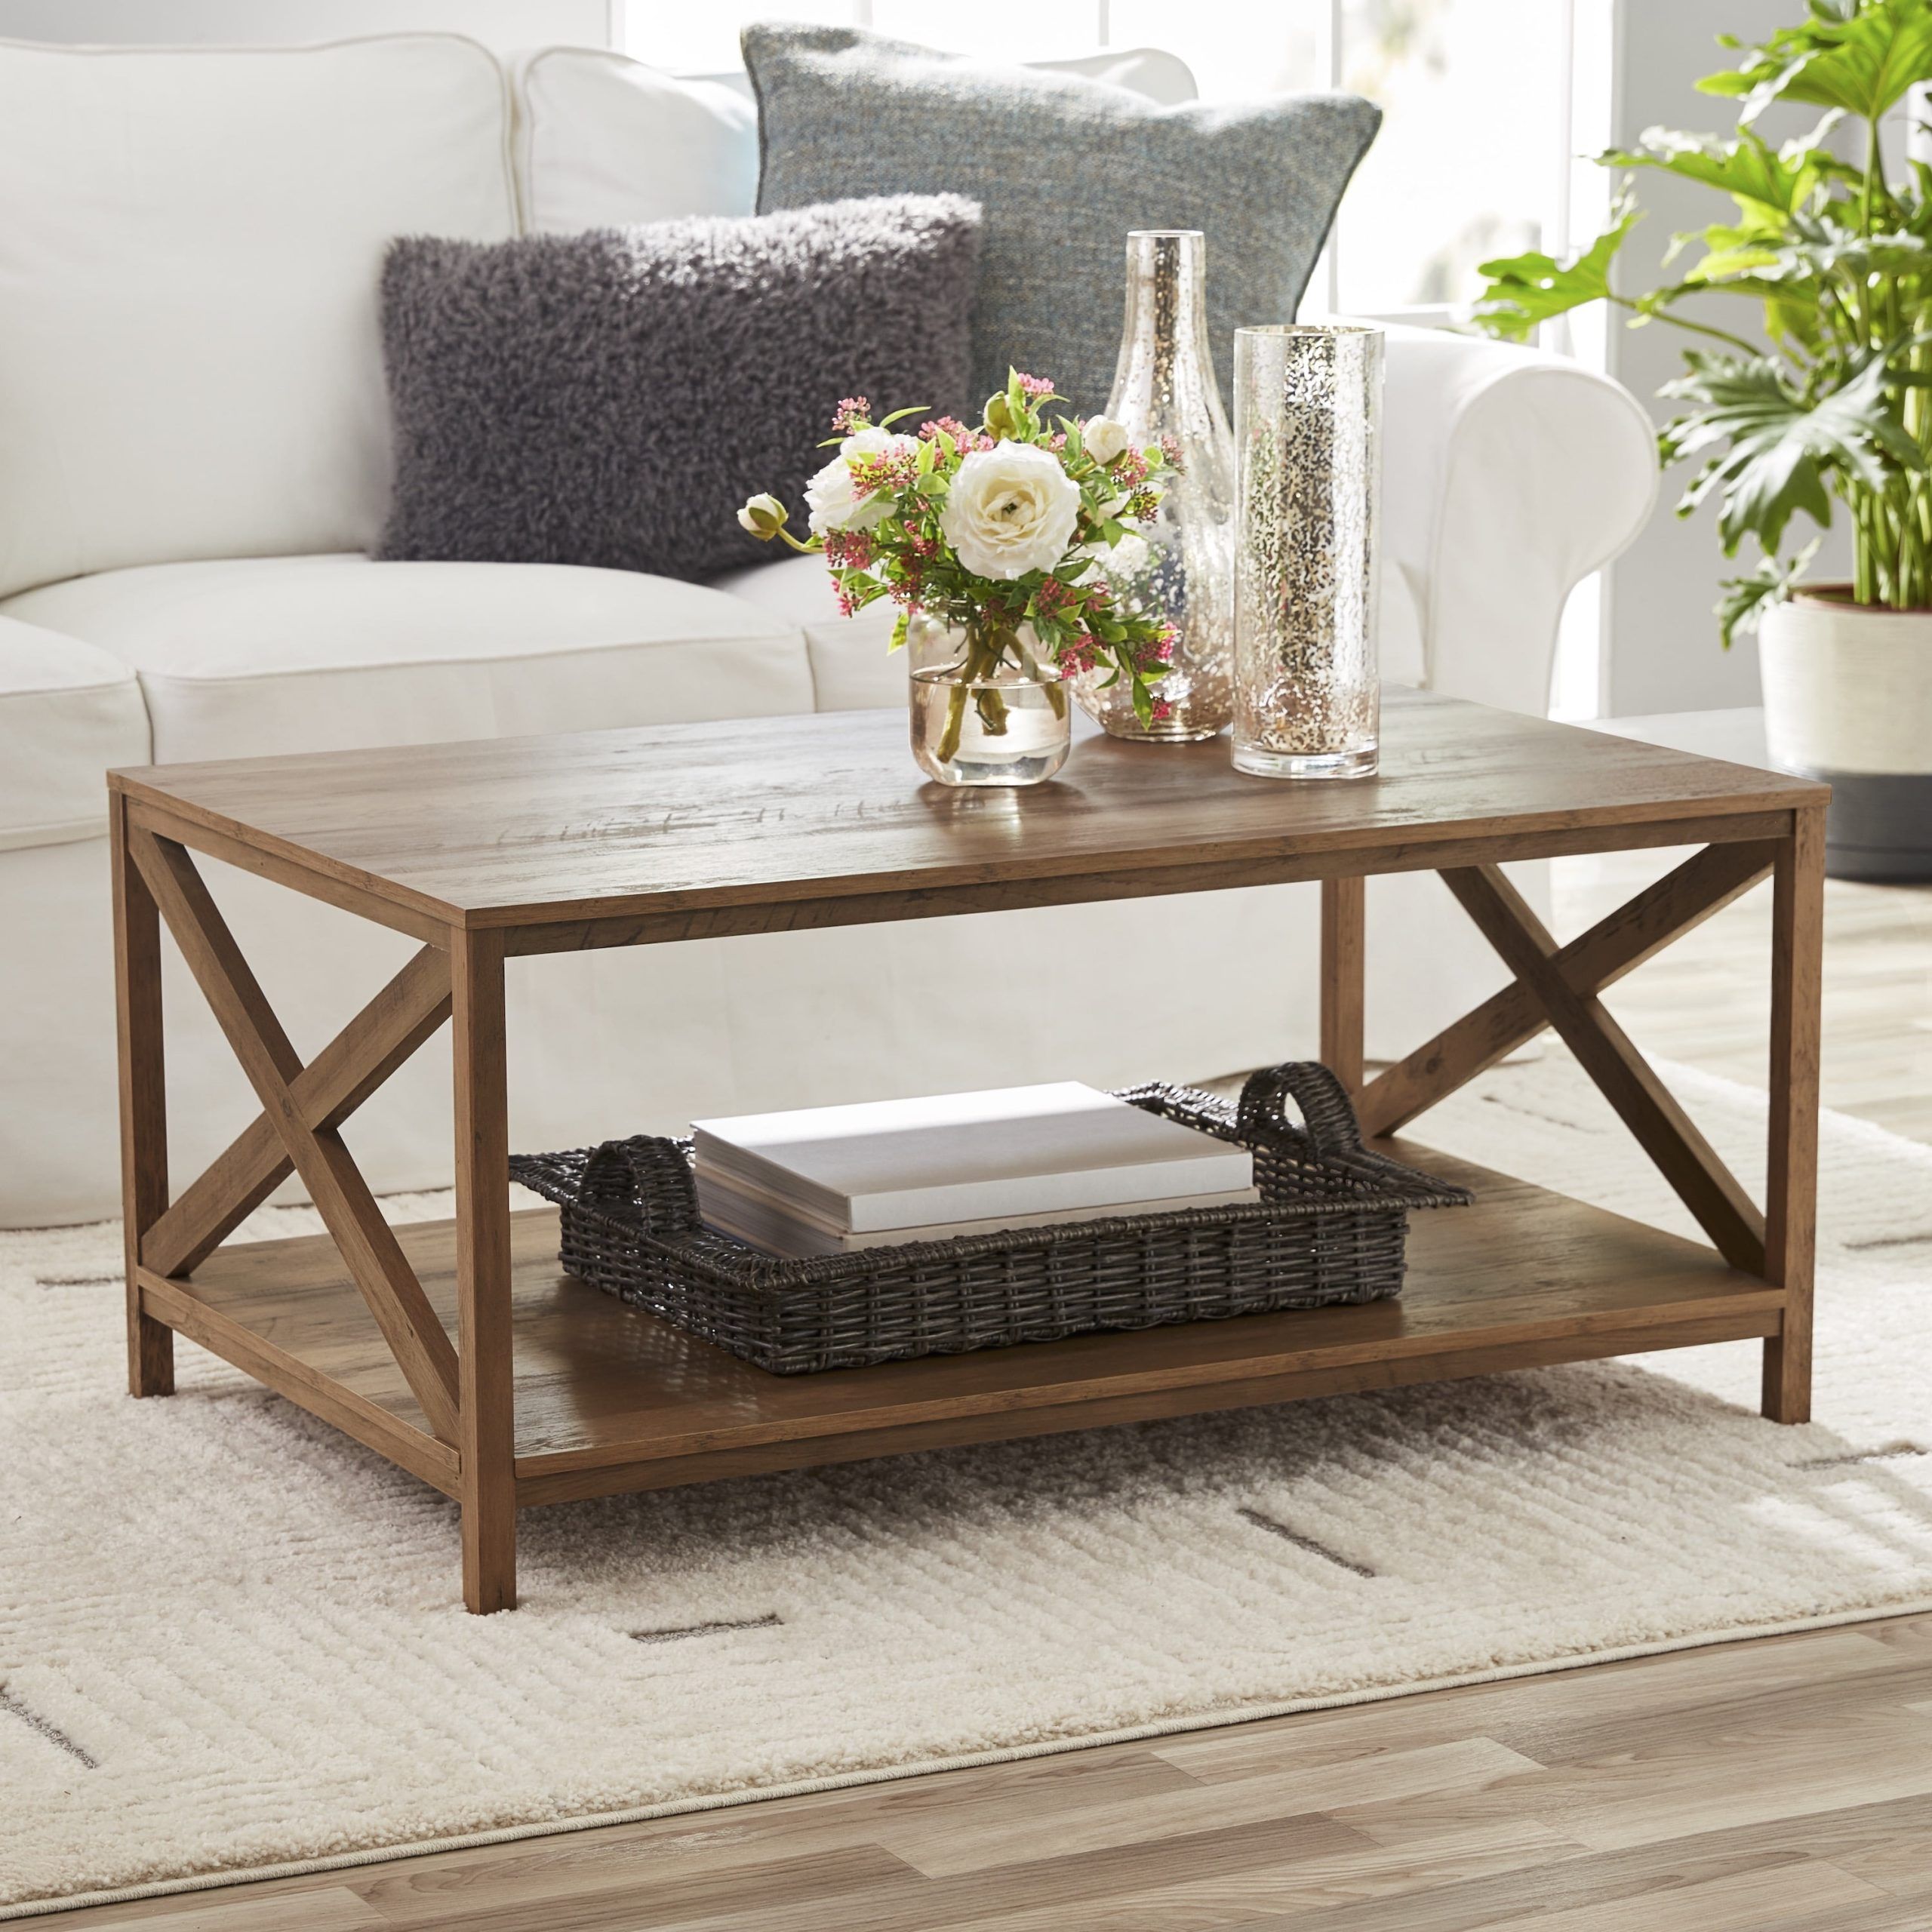 Farmhouse X Design Rectangle Coffee Table, Rustic Weathered Oak – Bed Bath  & Beyond – 36966361 Within Modern Wooden X Design Coffee Tables (View 8 of 15)